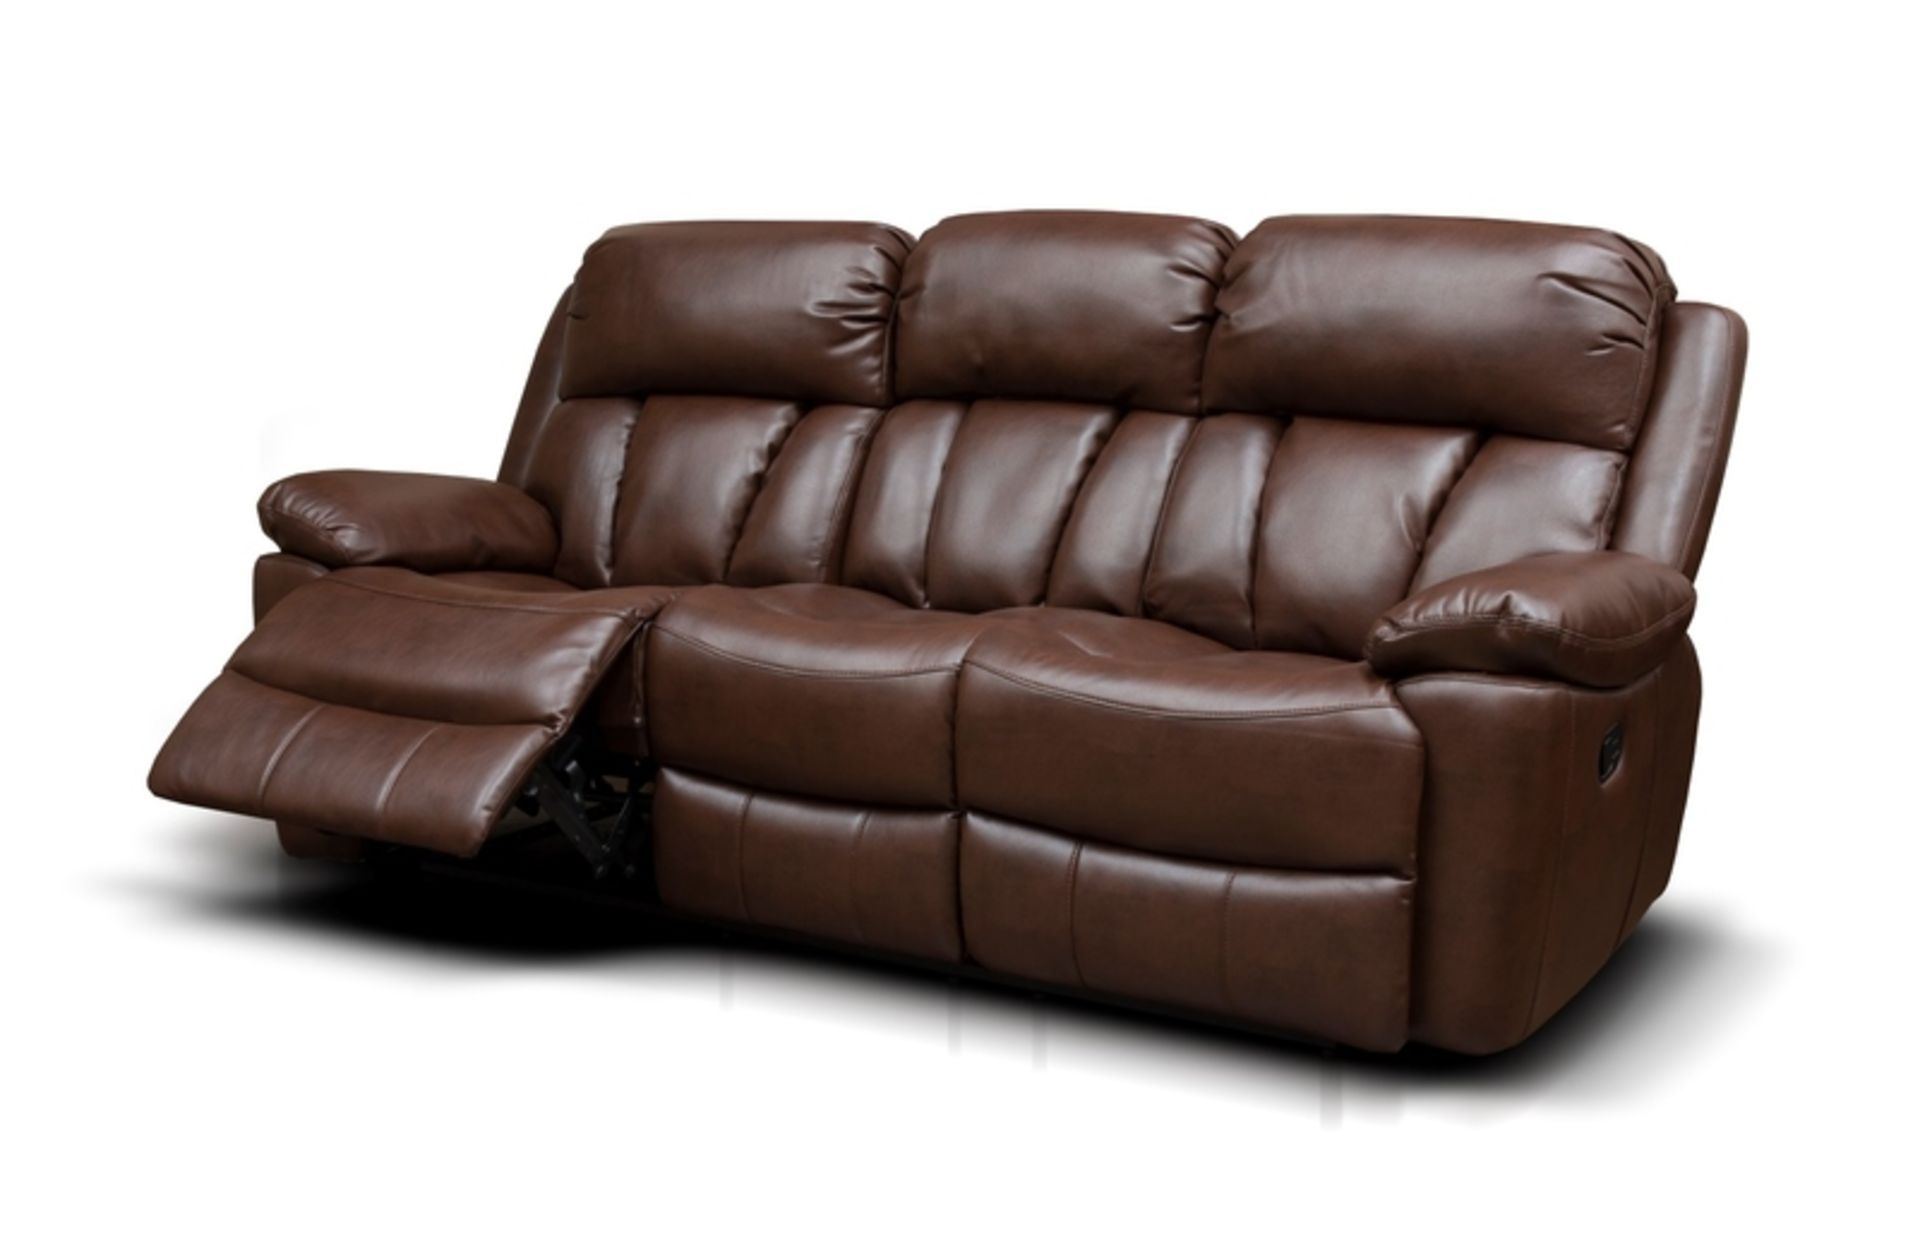 Brand New Boxed Benson 3 Seater Chestnut Leatheraire Reclining Sofa Plus 2 Matching Arm Chairs